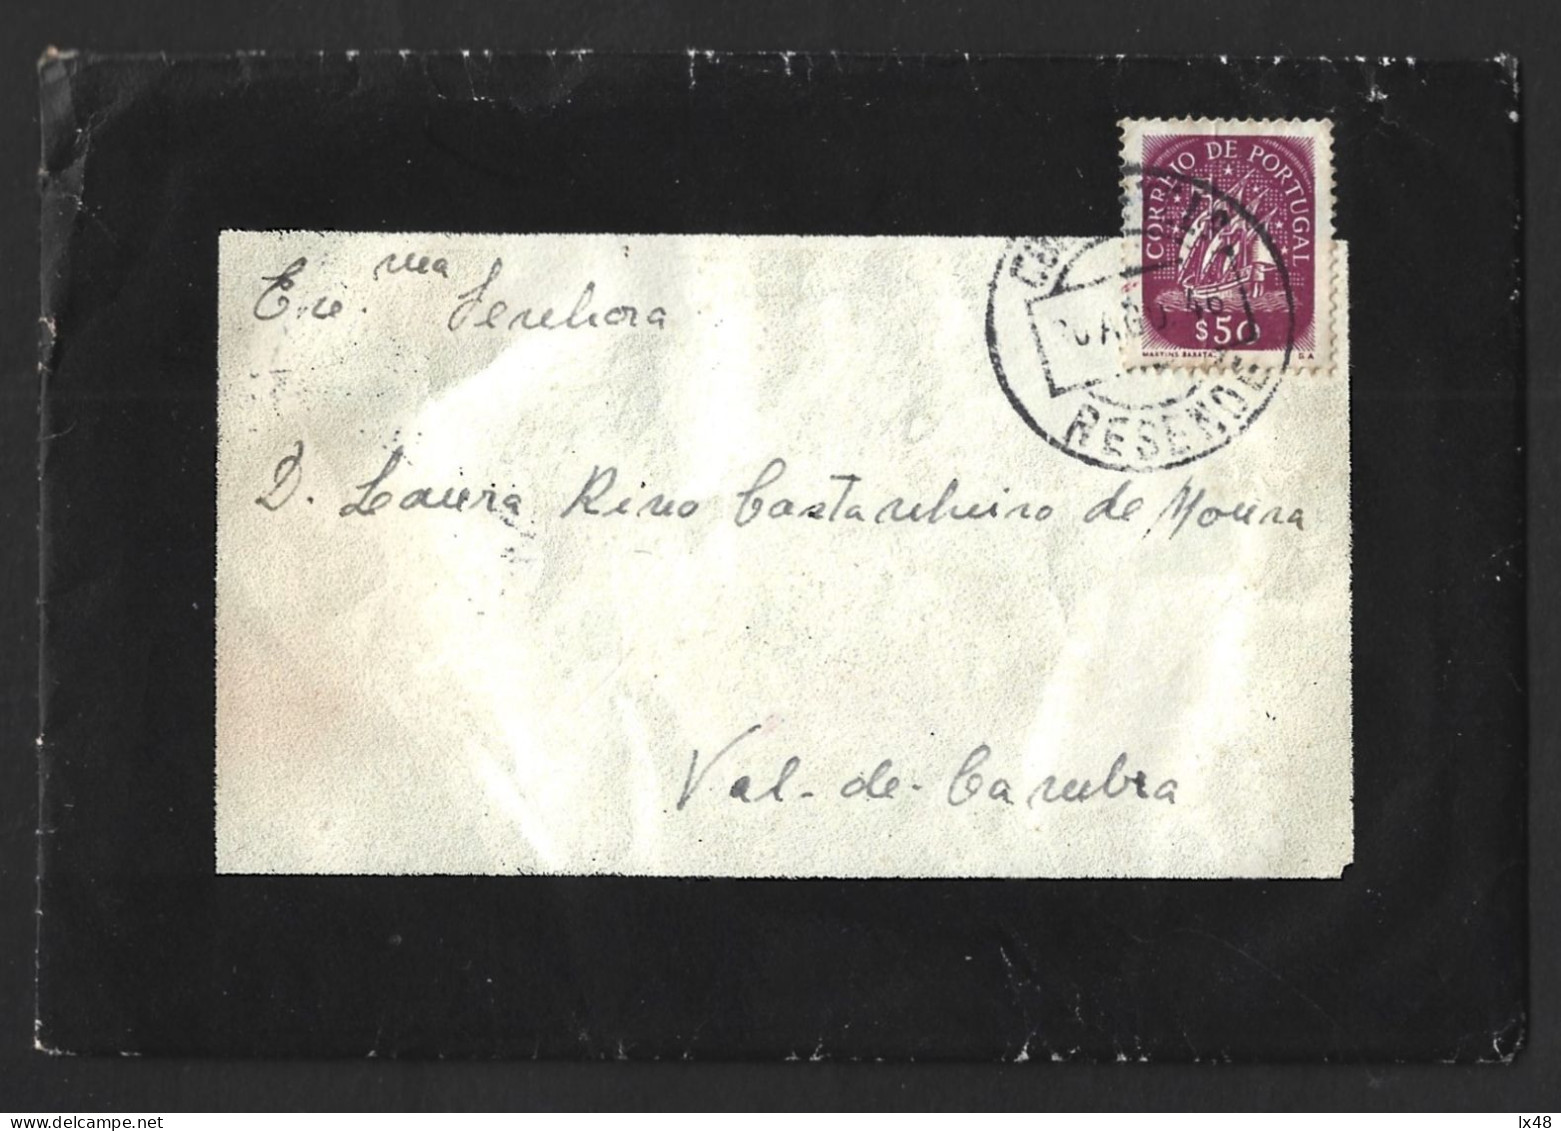 Carta De Luto Circulada De Resende Em 1946. Stamp Caravela.  Mourning Letter Circulated From Resende In 1946. Stamp Cara - Covers & Documents